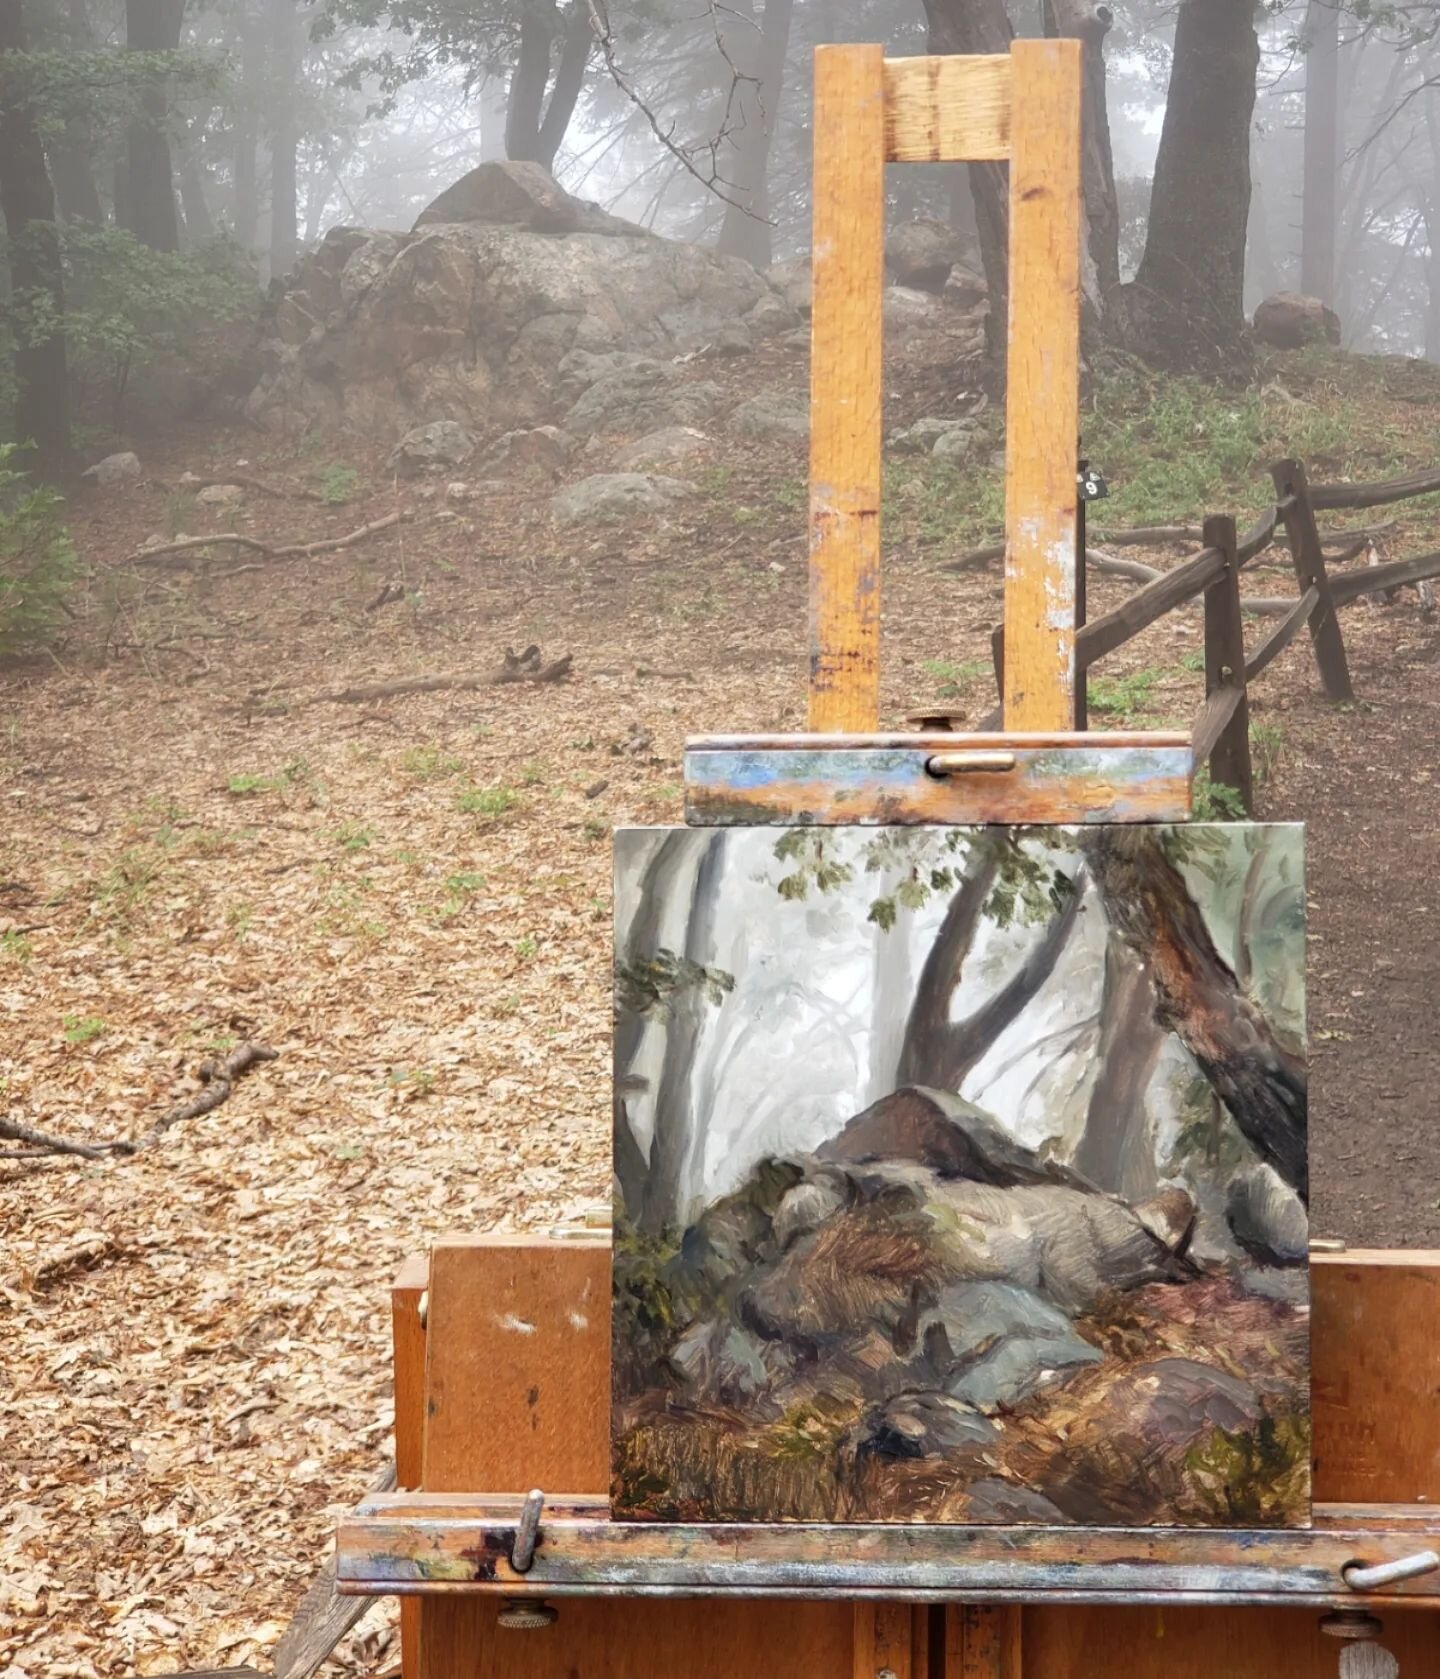 Rocks that look like an old burial mound. What a blessing to paint in a deep, misty mountain forest.

#lakearrowhead #californiaart #californiapleinair #pleinairpainter #pleinairlandscape #burialmound #burial #darkfolk #darkfolklore #darkforest #mist